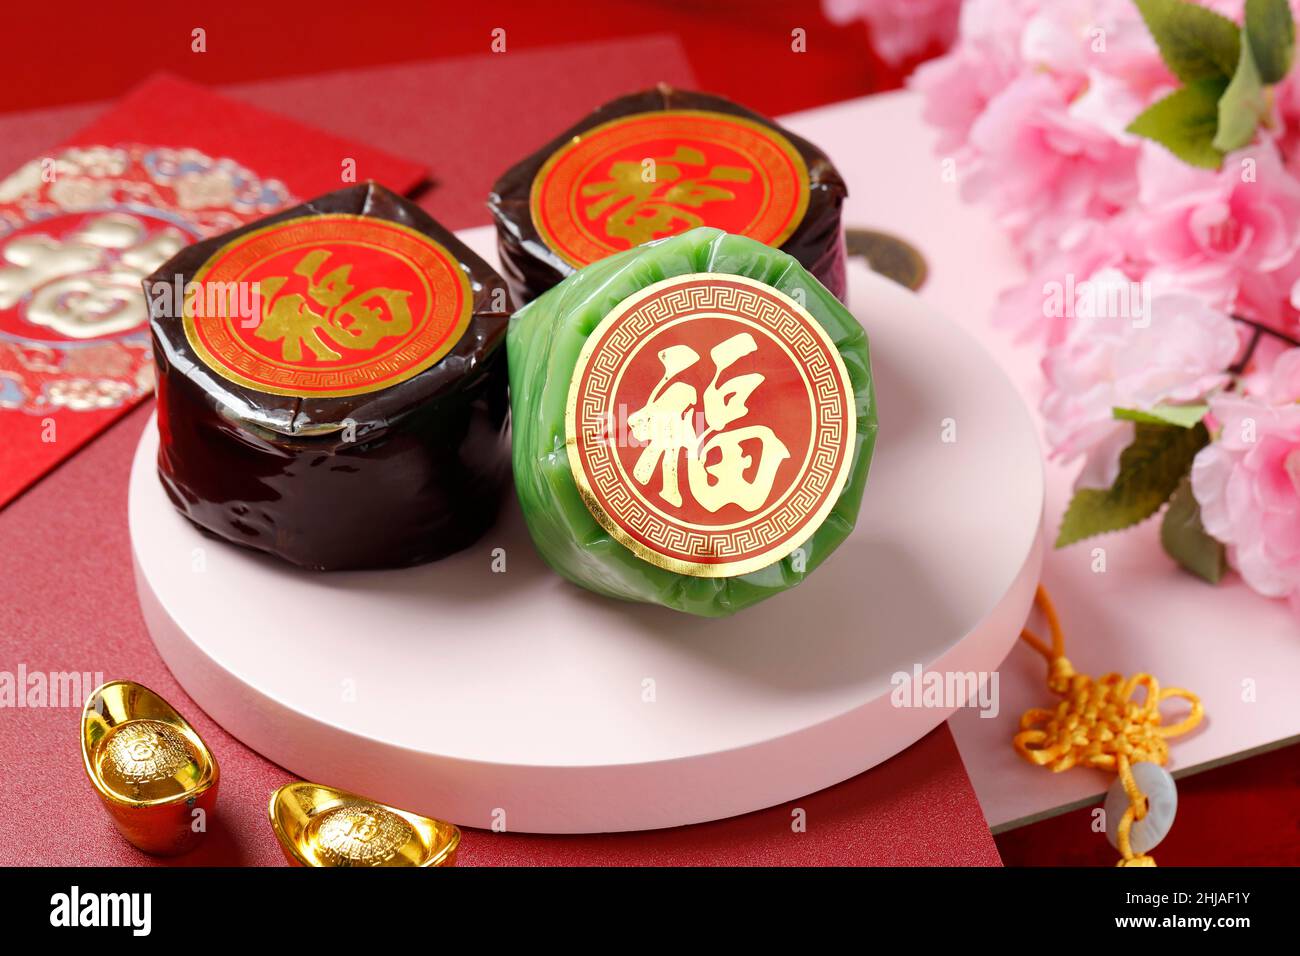 Nian Gao Pandan or Glutinous Rice Cake with Good Luck in Chinese Words. Popular as Kue Keranjang or Kue Bakul. Chinese Character Fu Means Fortune Stock Photo